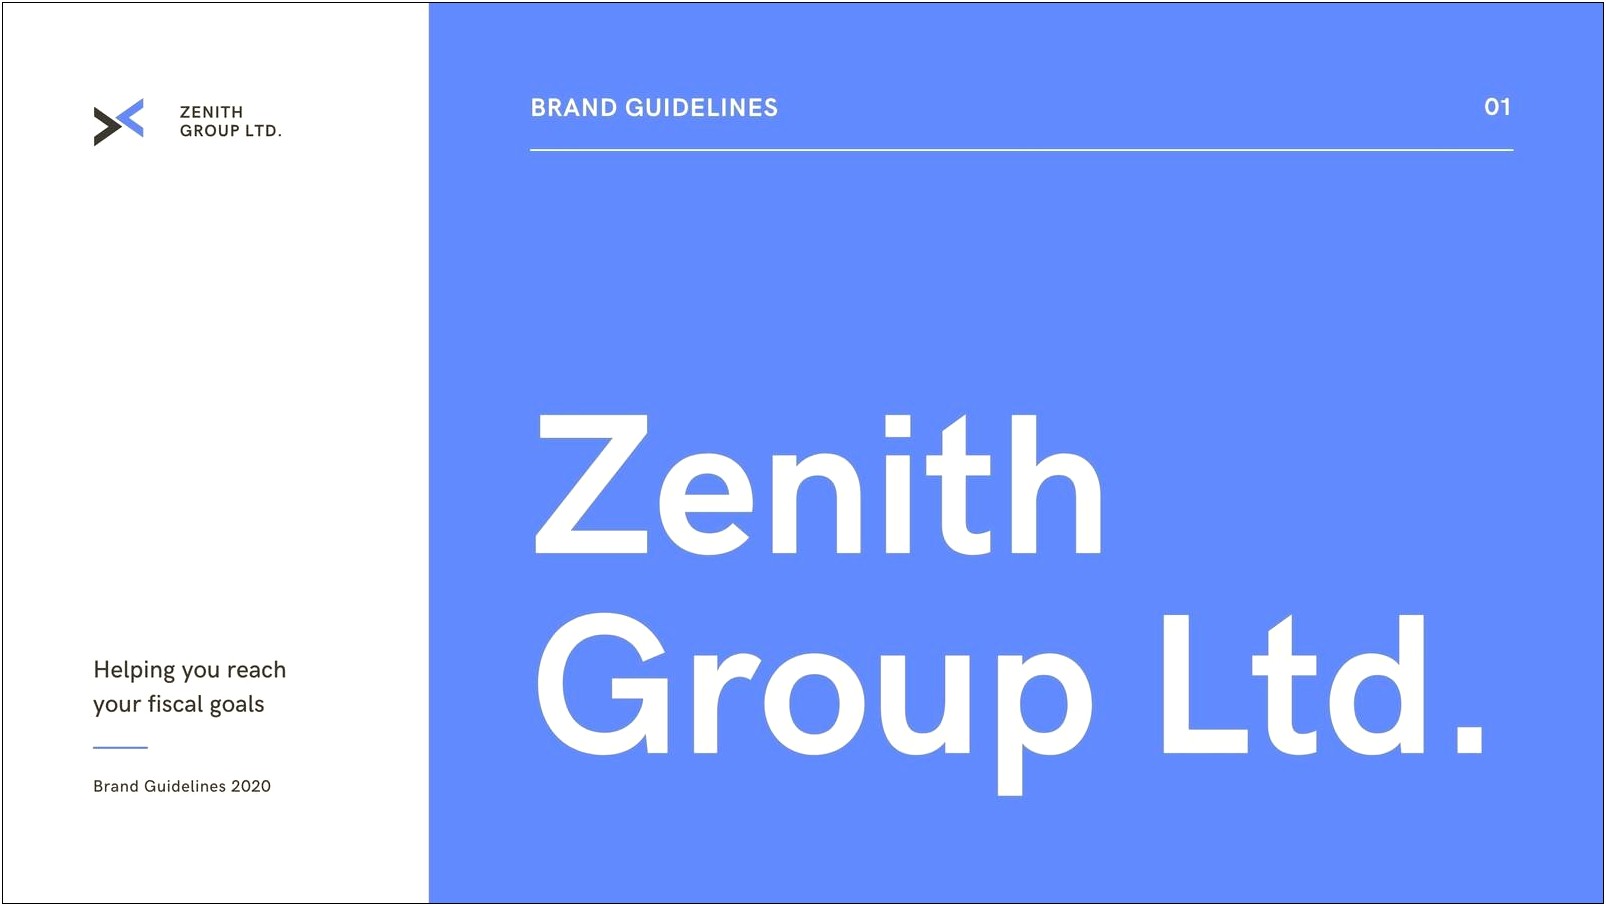 One Page Brand Guidelines Template Free